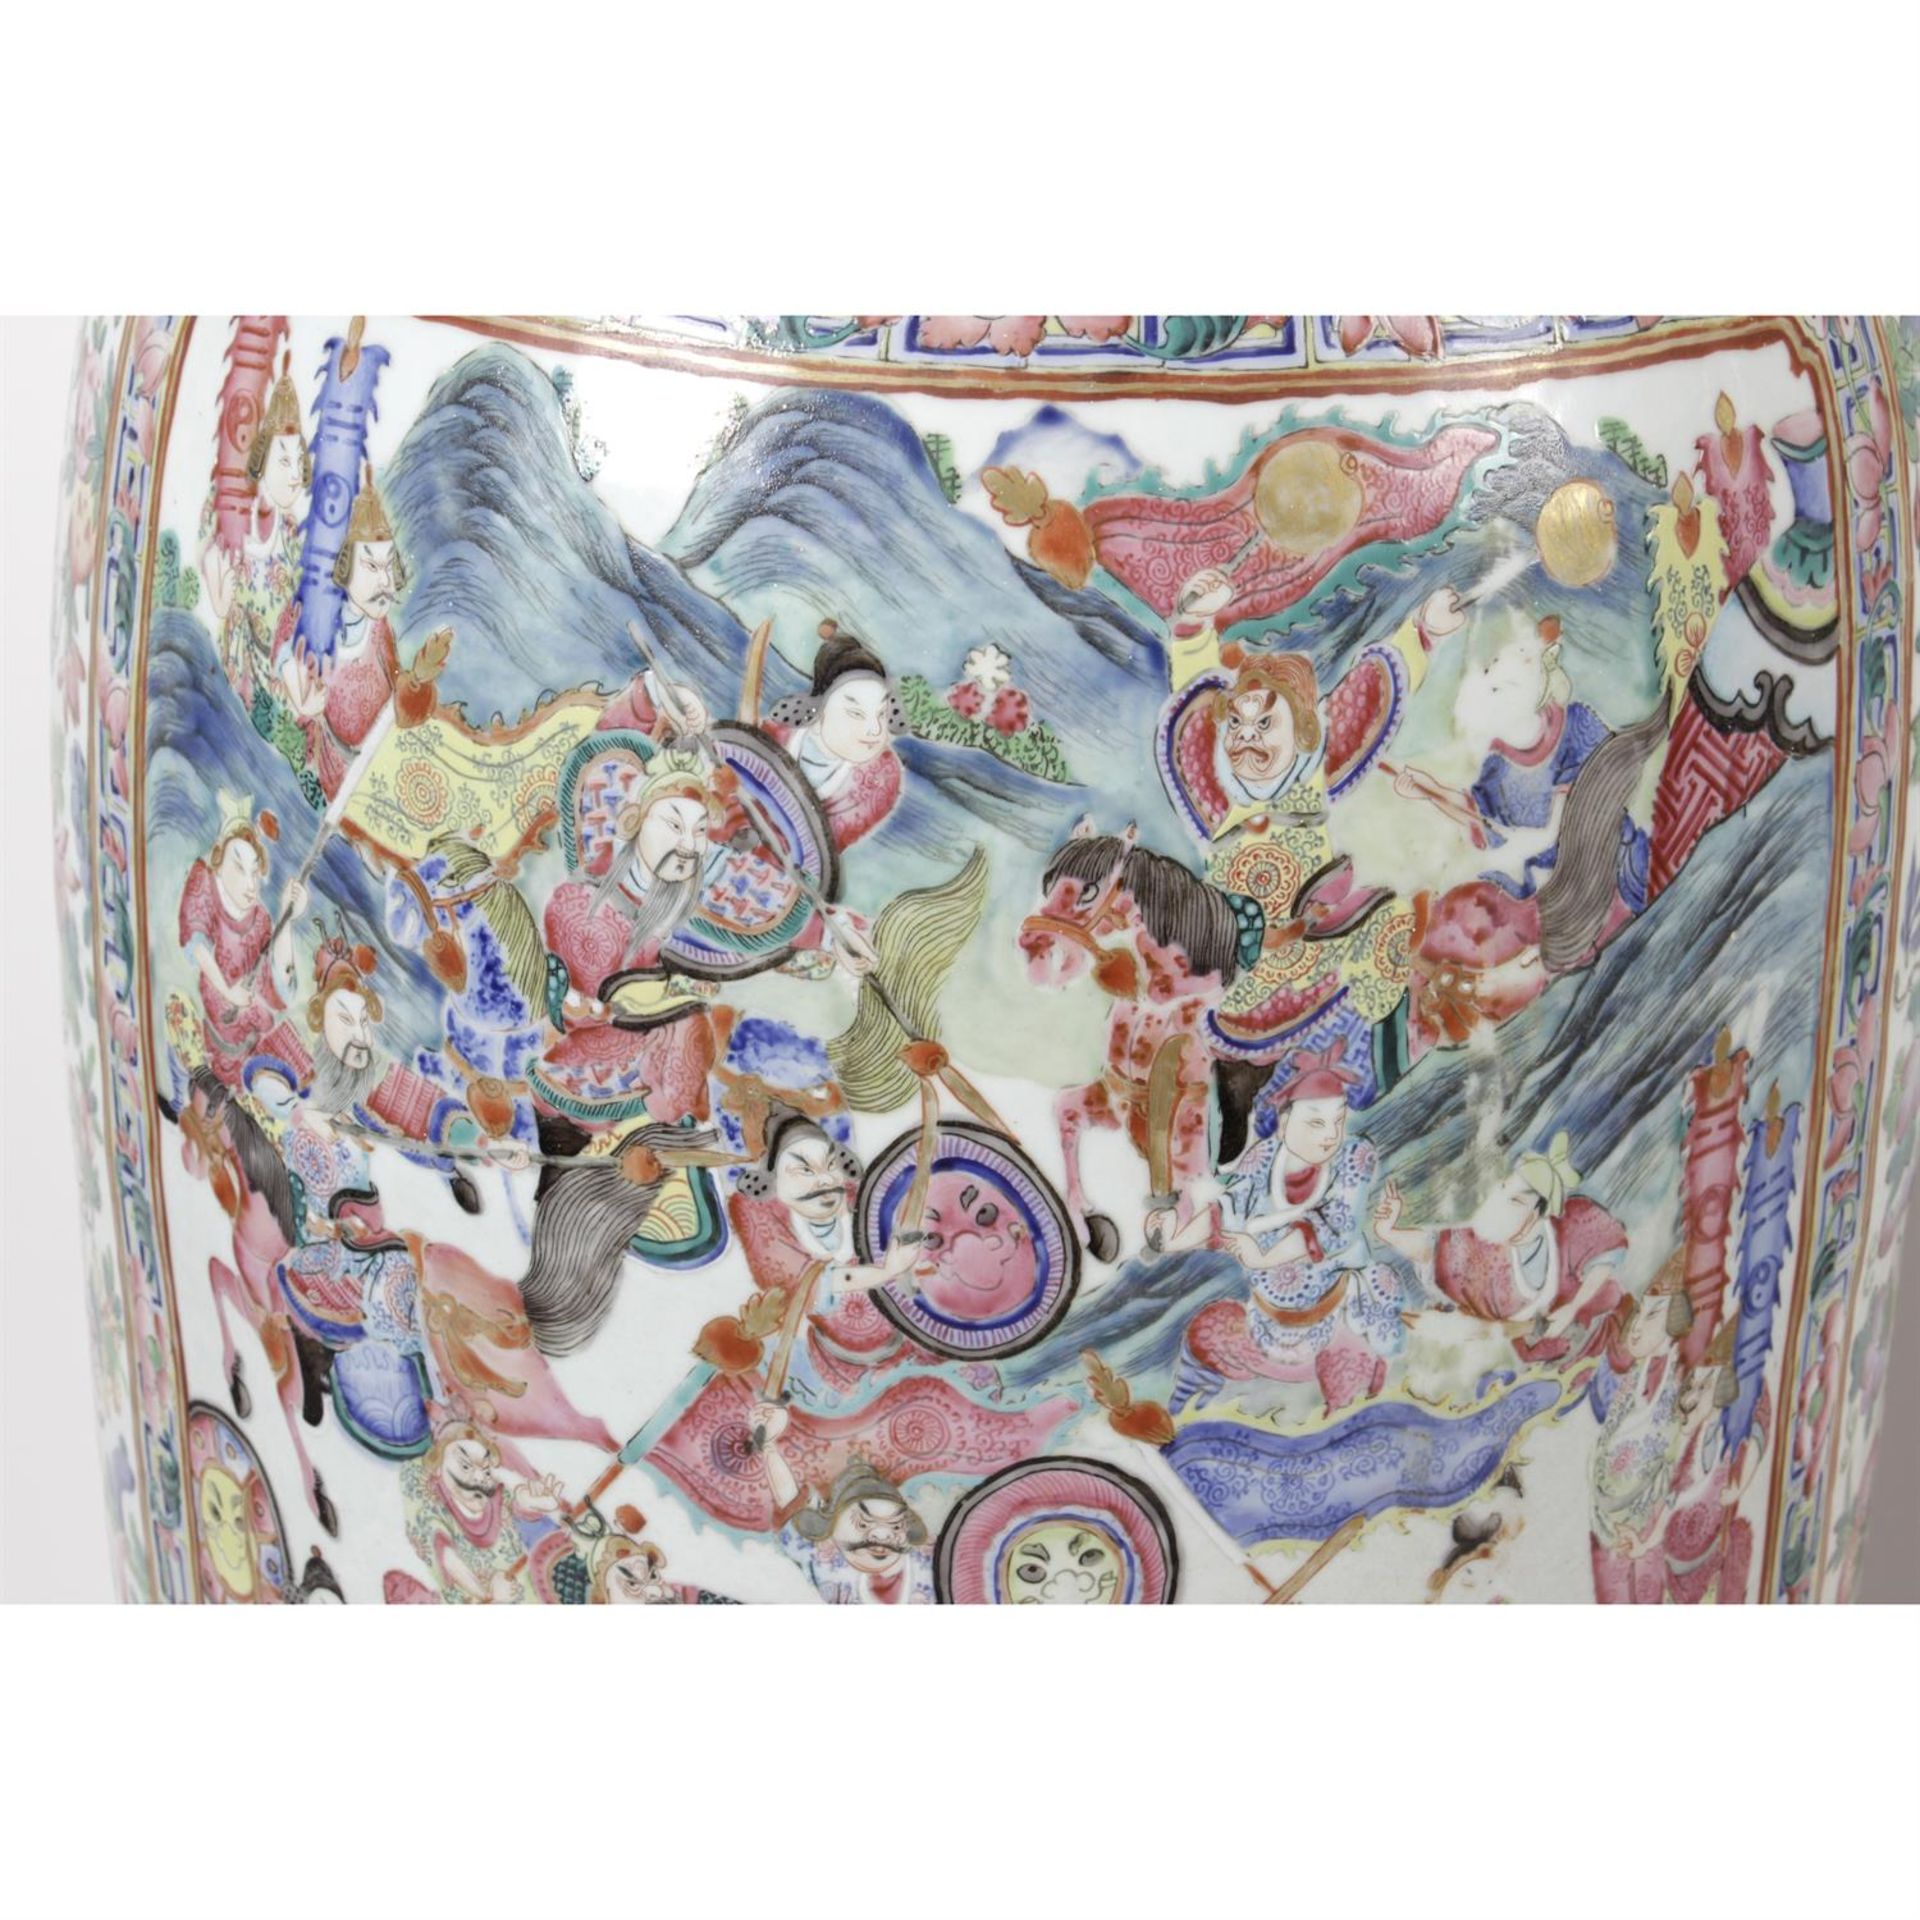 A pair of impressive, large mid-19th century Cantonese porcelain vases. - Image 6 of 20